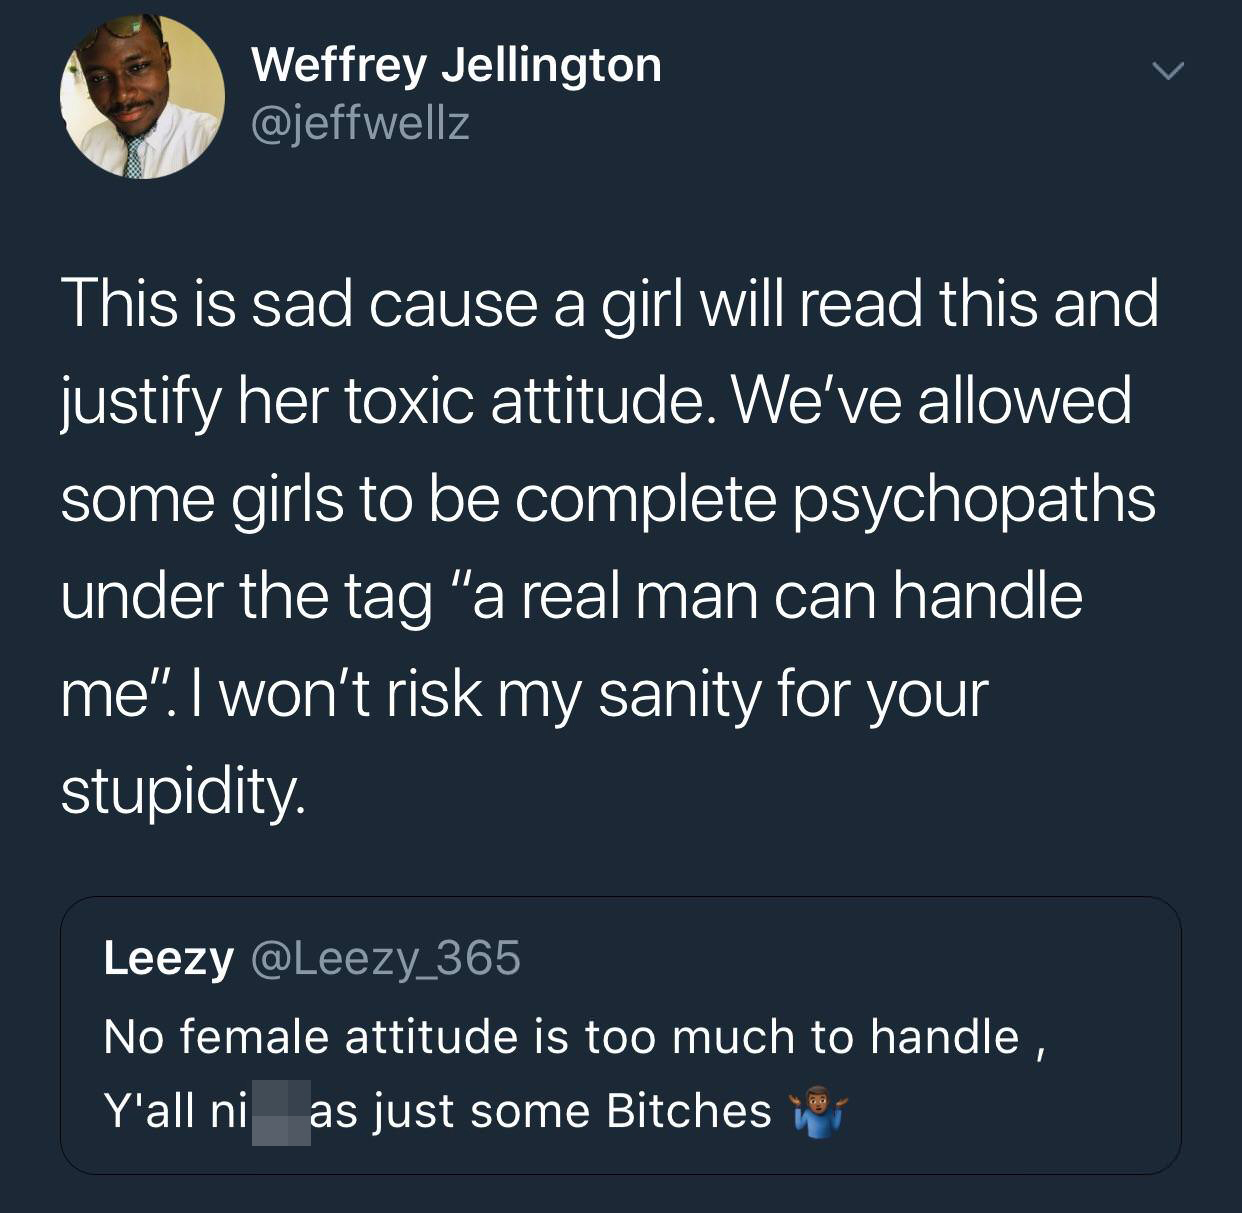 tweet - black sad tweets - Weffrey Jellington This is sad cause a girl will read this and justify her toxic attitude. We've allowed some girls to be complete psychopaths under the tag "a real man can handle me. I won't risk my sanity for your stupidity. L